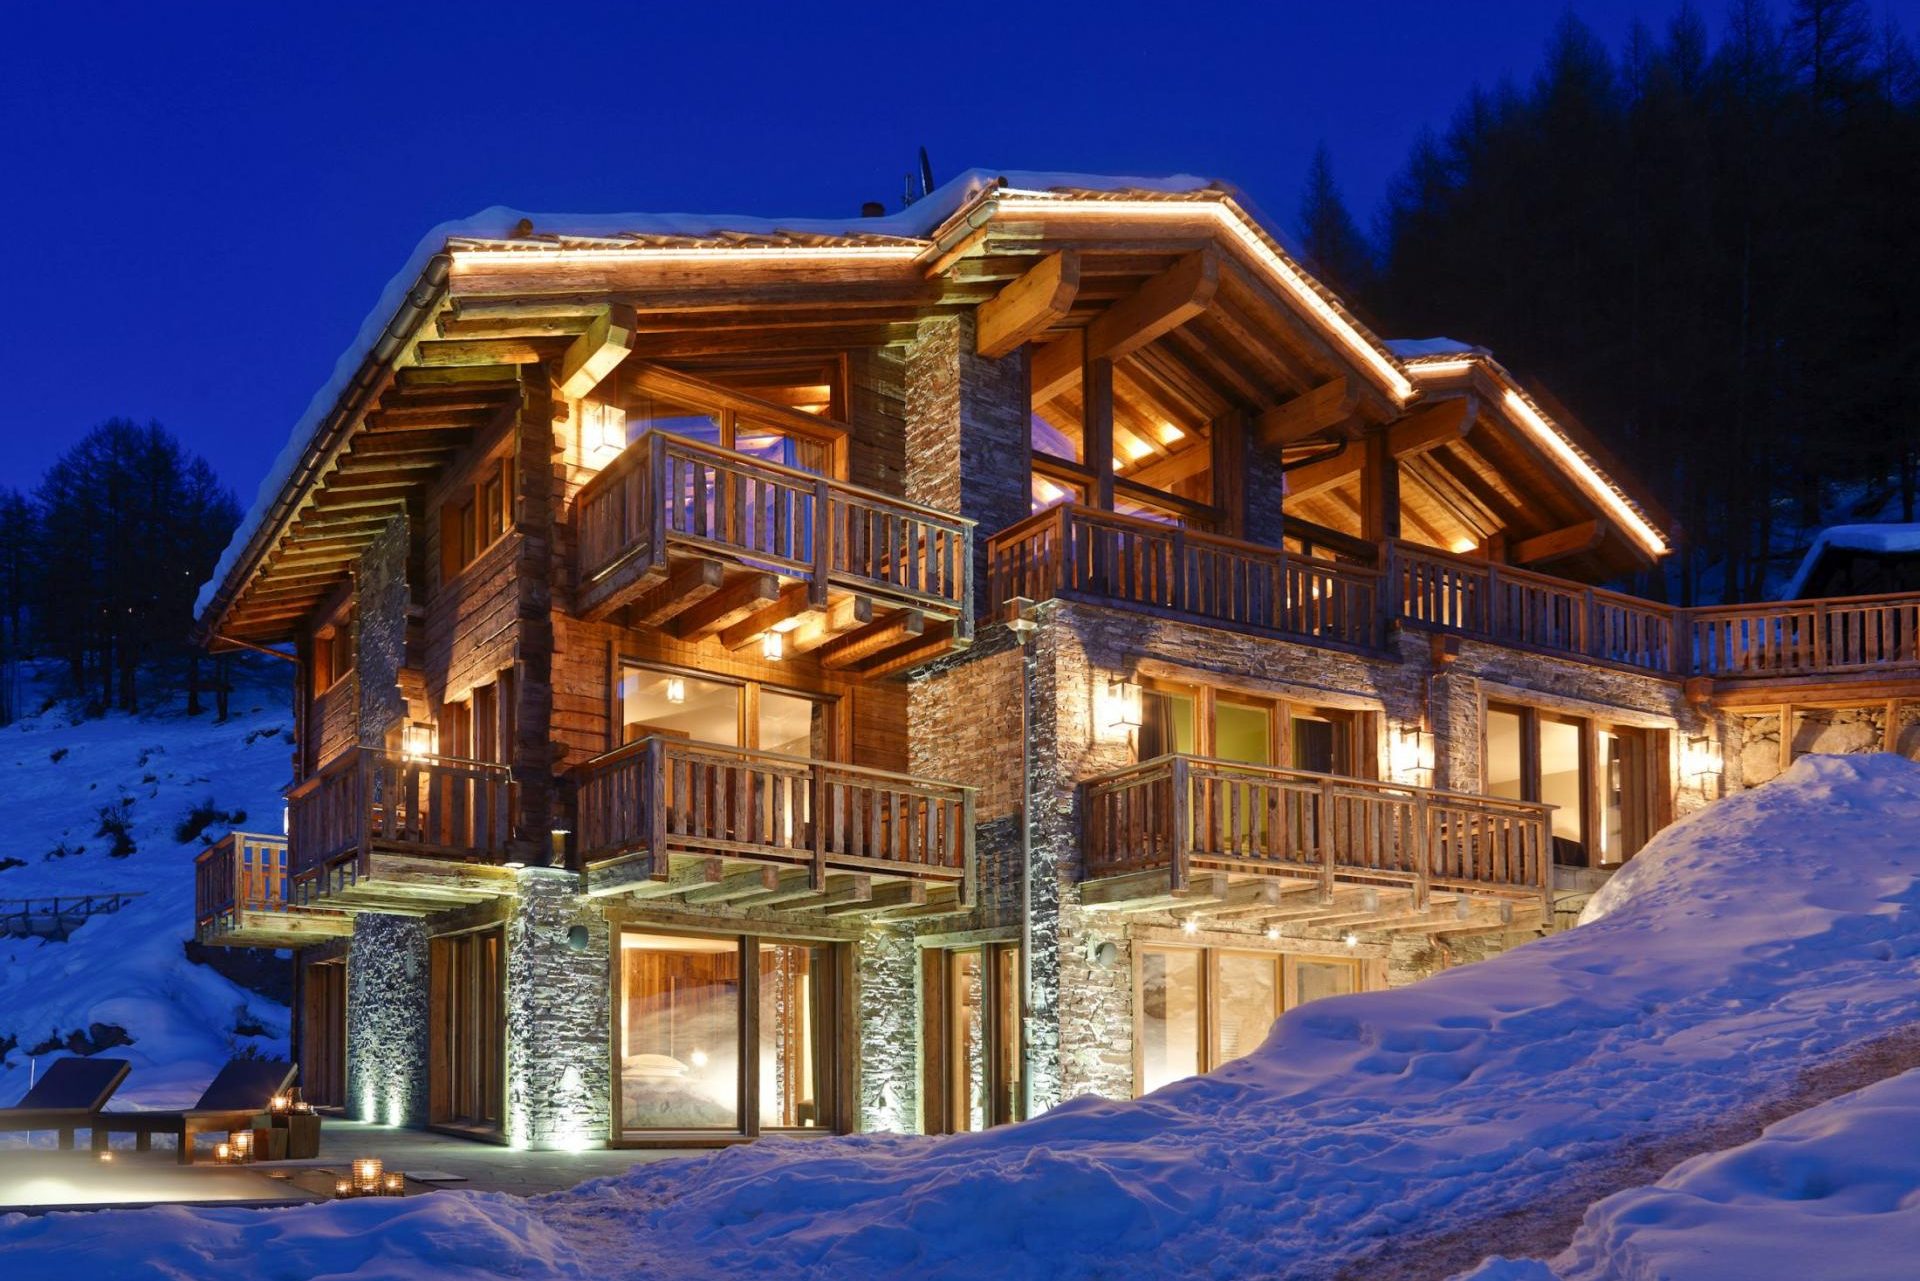 Exterior of Chalet Les Anges at night, lit up warmly and surrounded by snow.